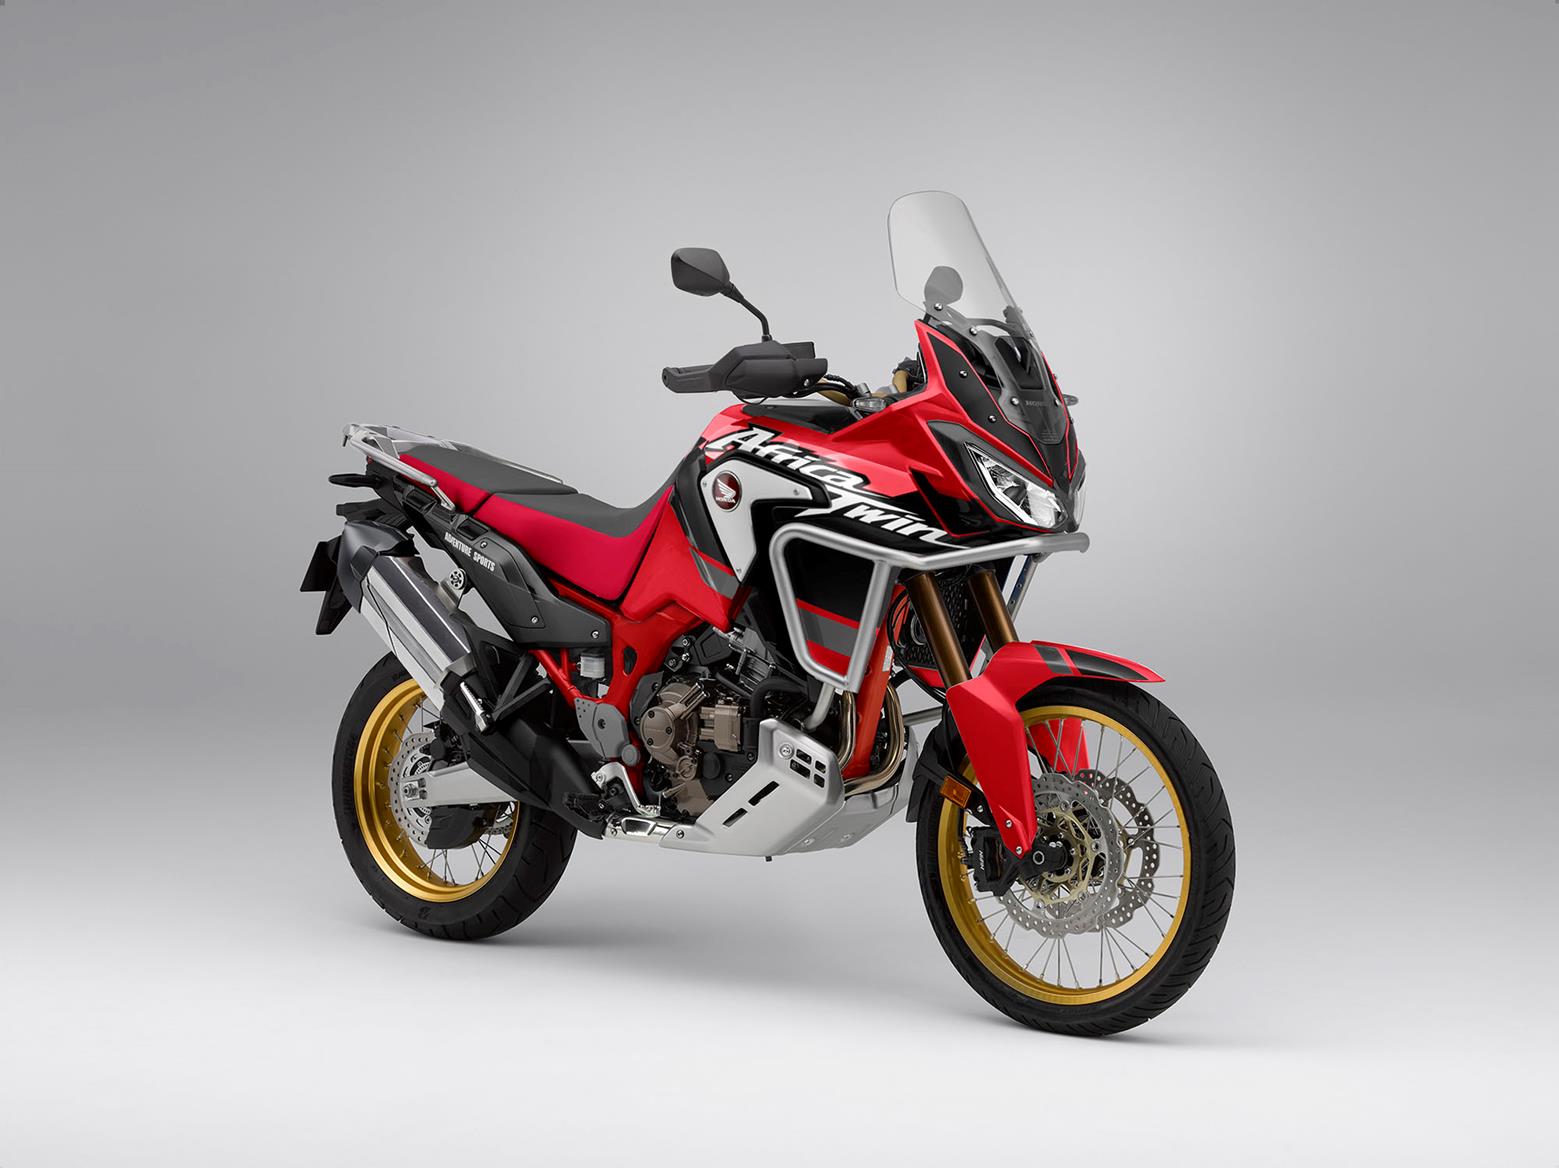 Honda Africa Twin Set To Evolve For 2020